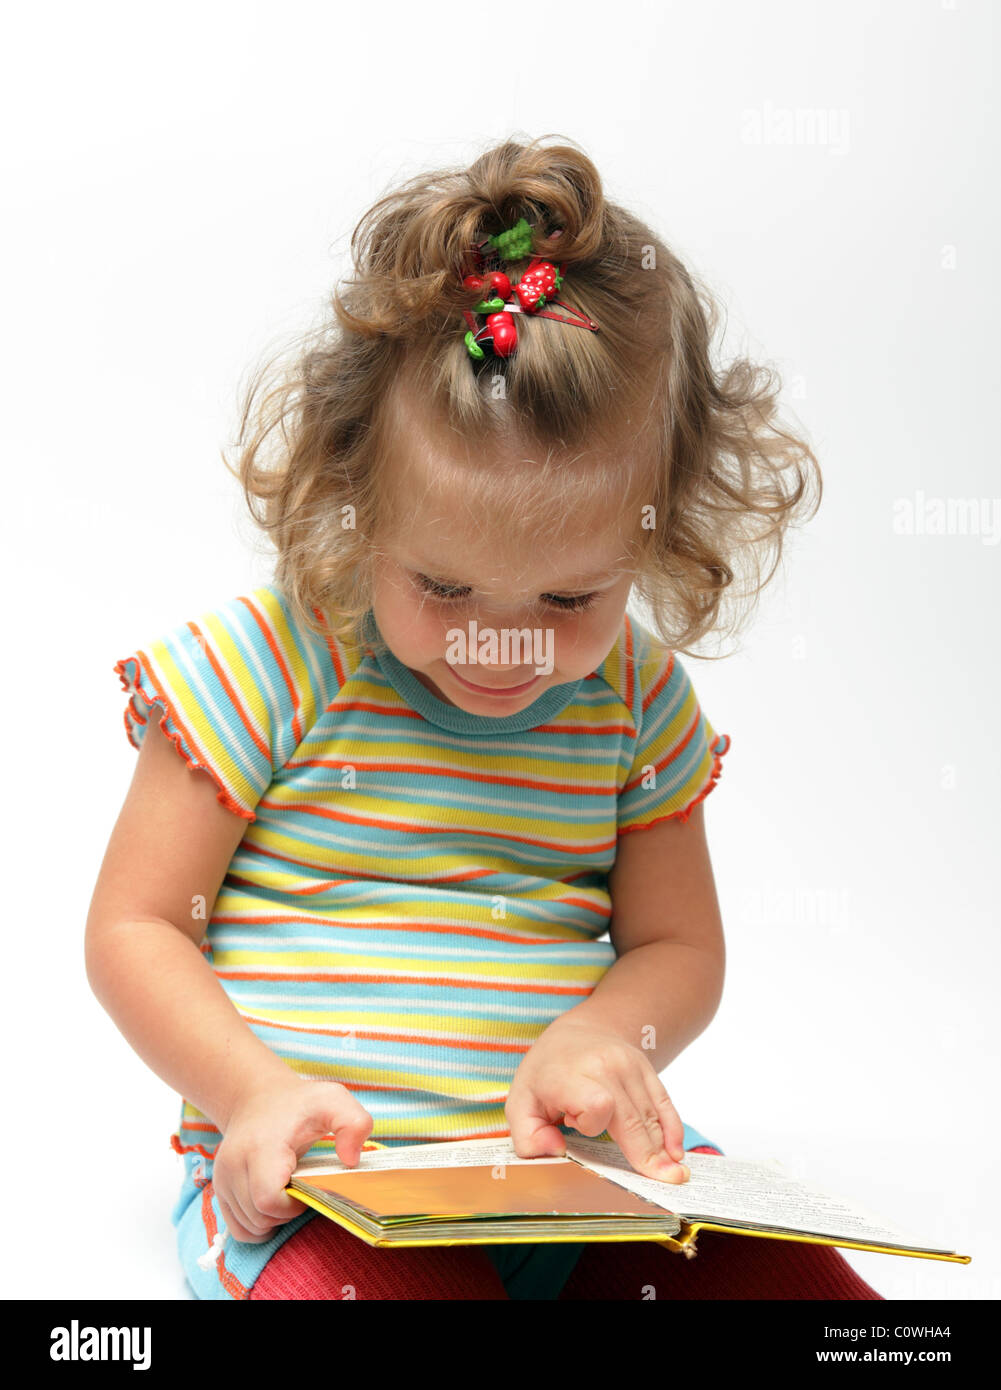 Cute little girl sitting with book Banque D'Images